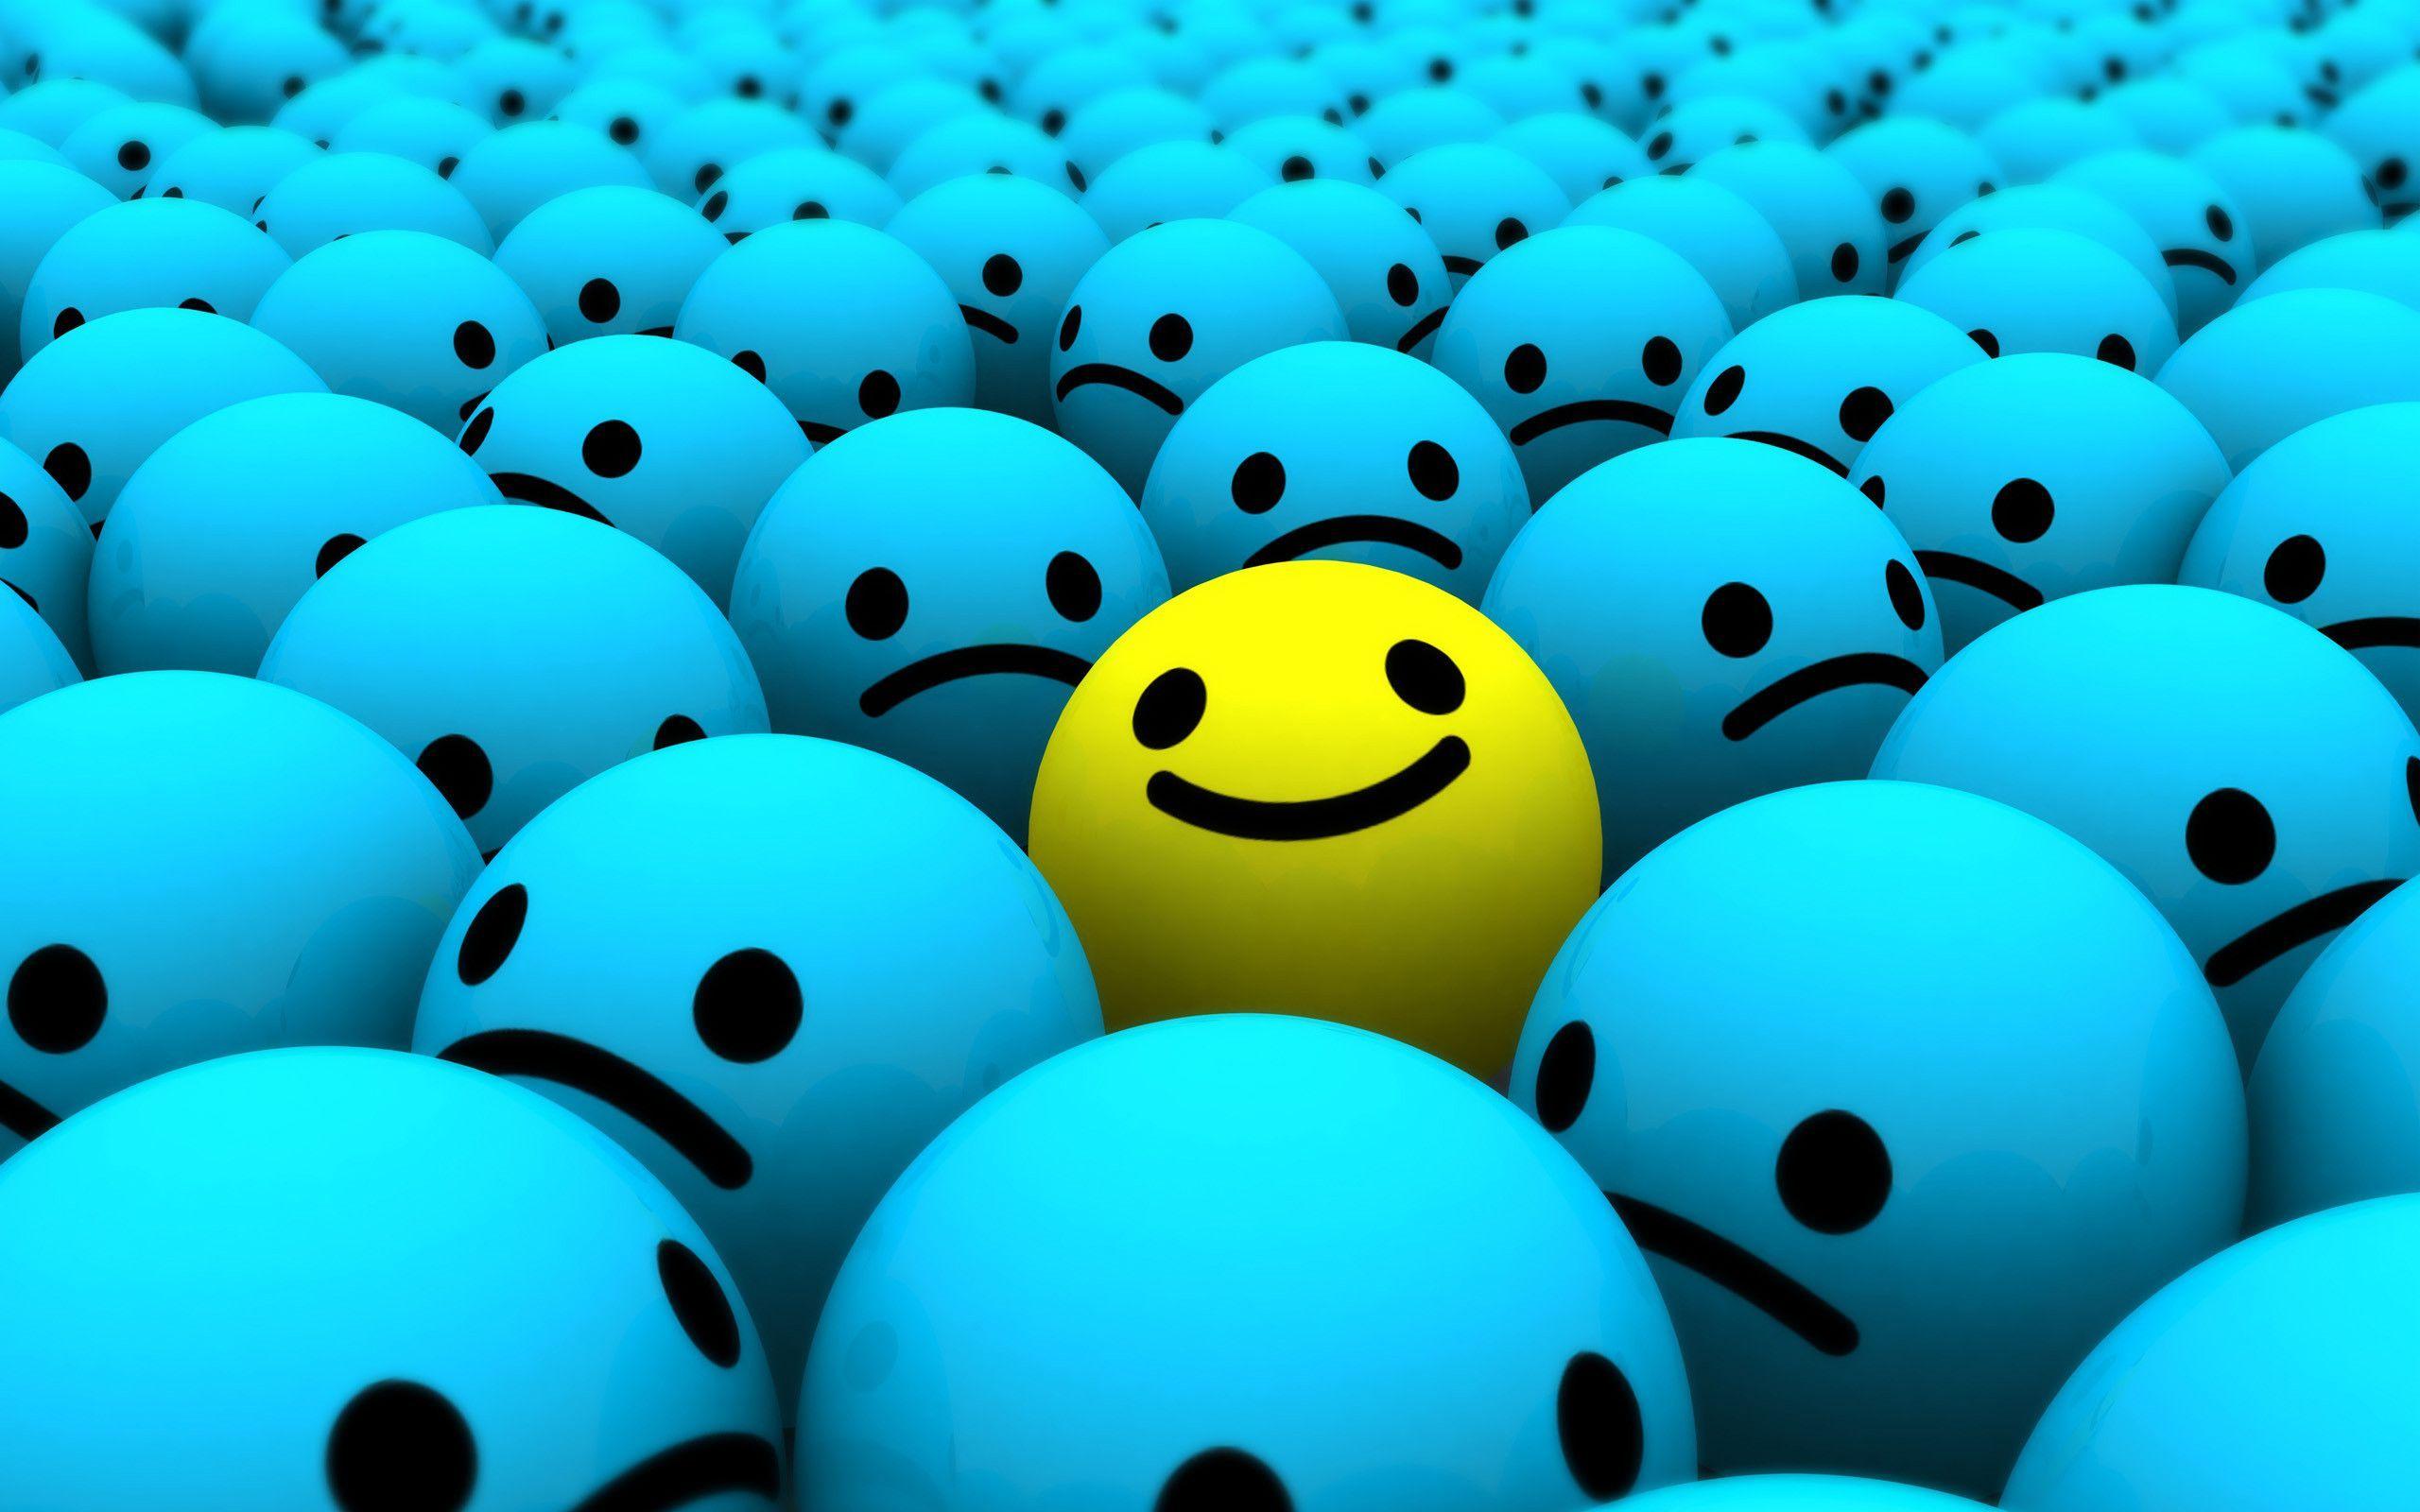 A yellow smiley face in the middle of many blue eggs - Smile